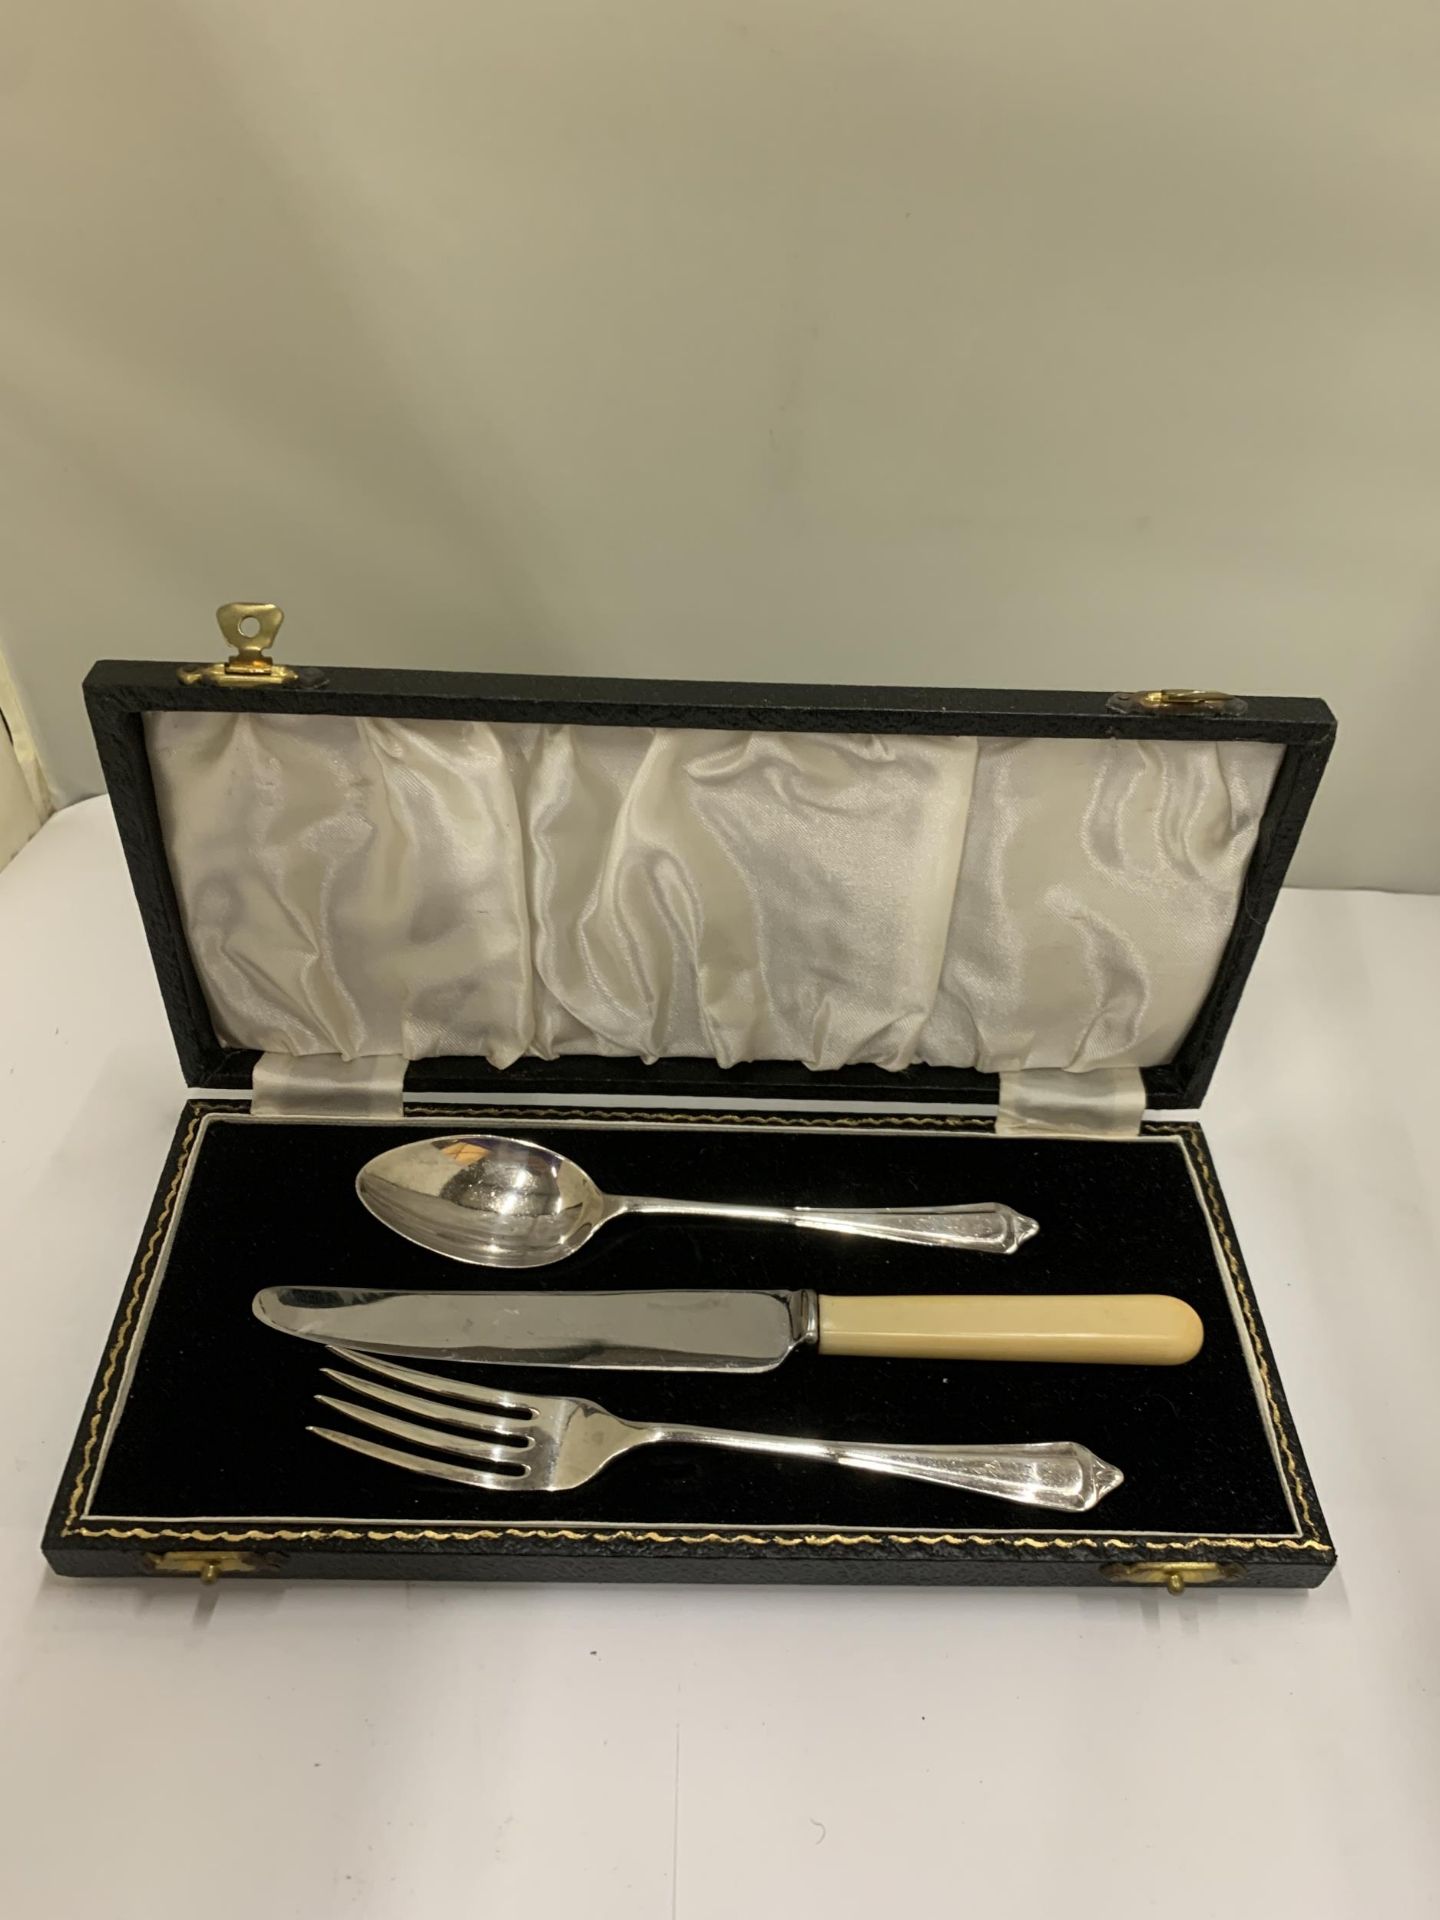 A HALLMARKED BIRMINGHAM SILVER KNIFE, FORK AND SPOON SET IN A PRESENTATION CASE